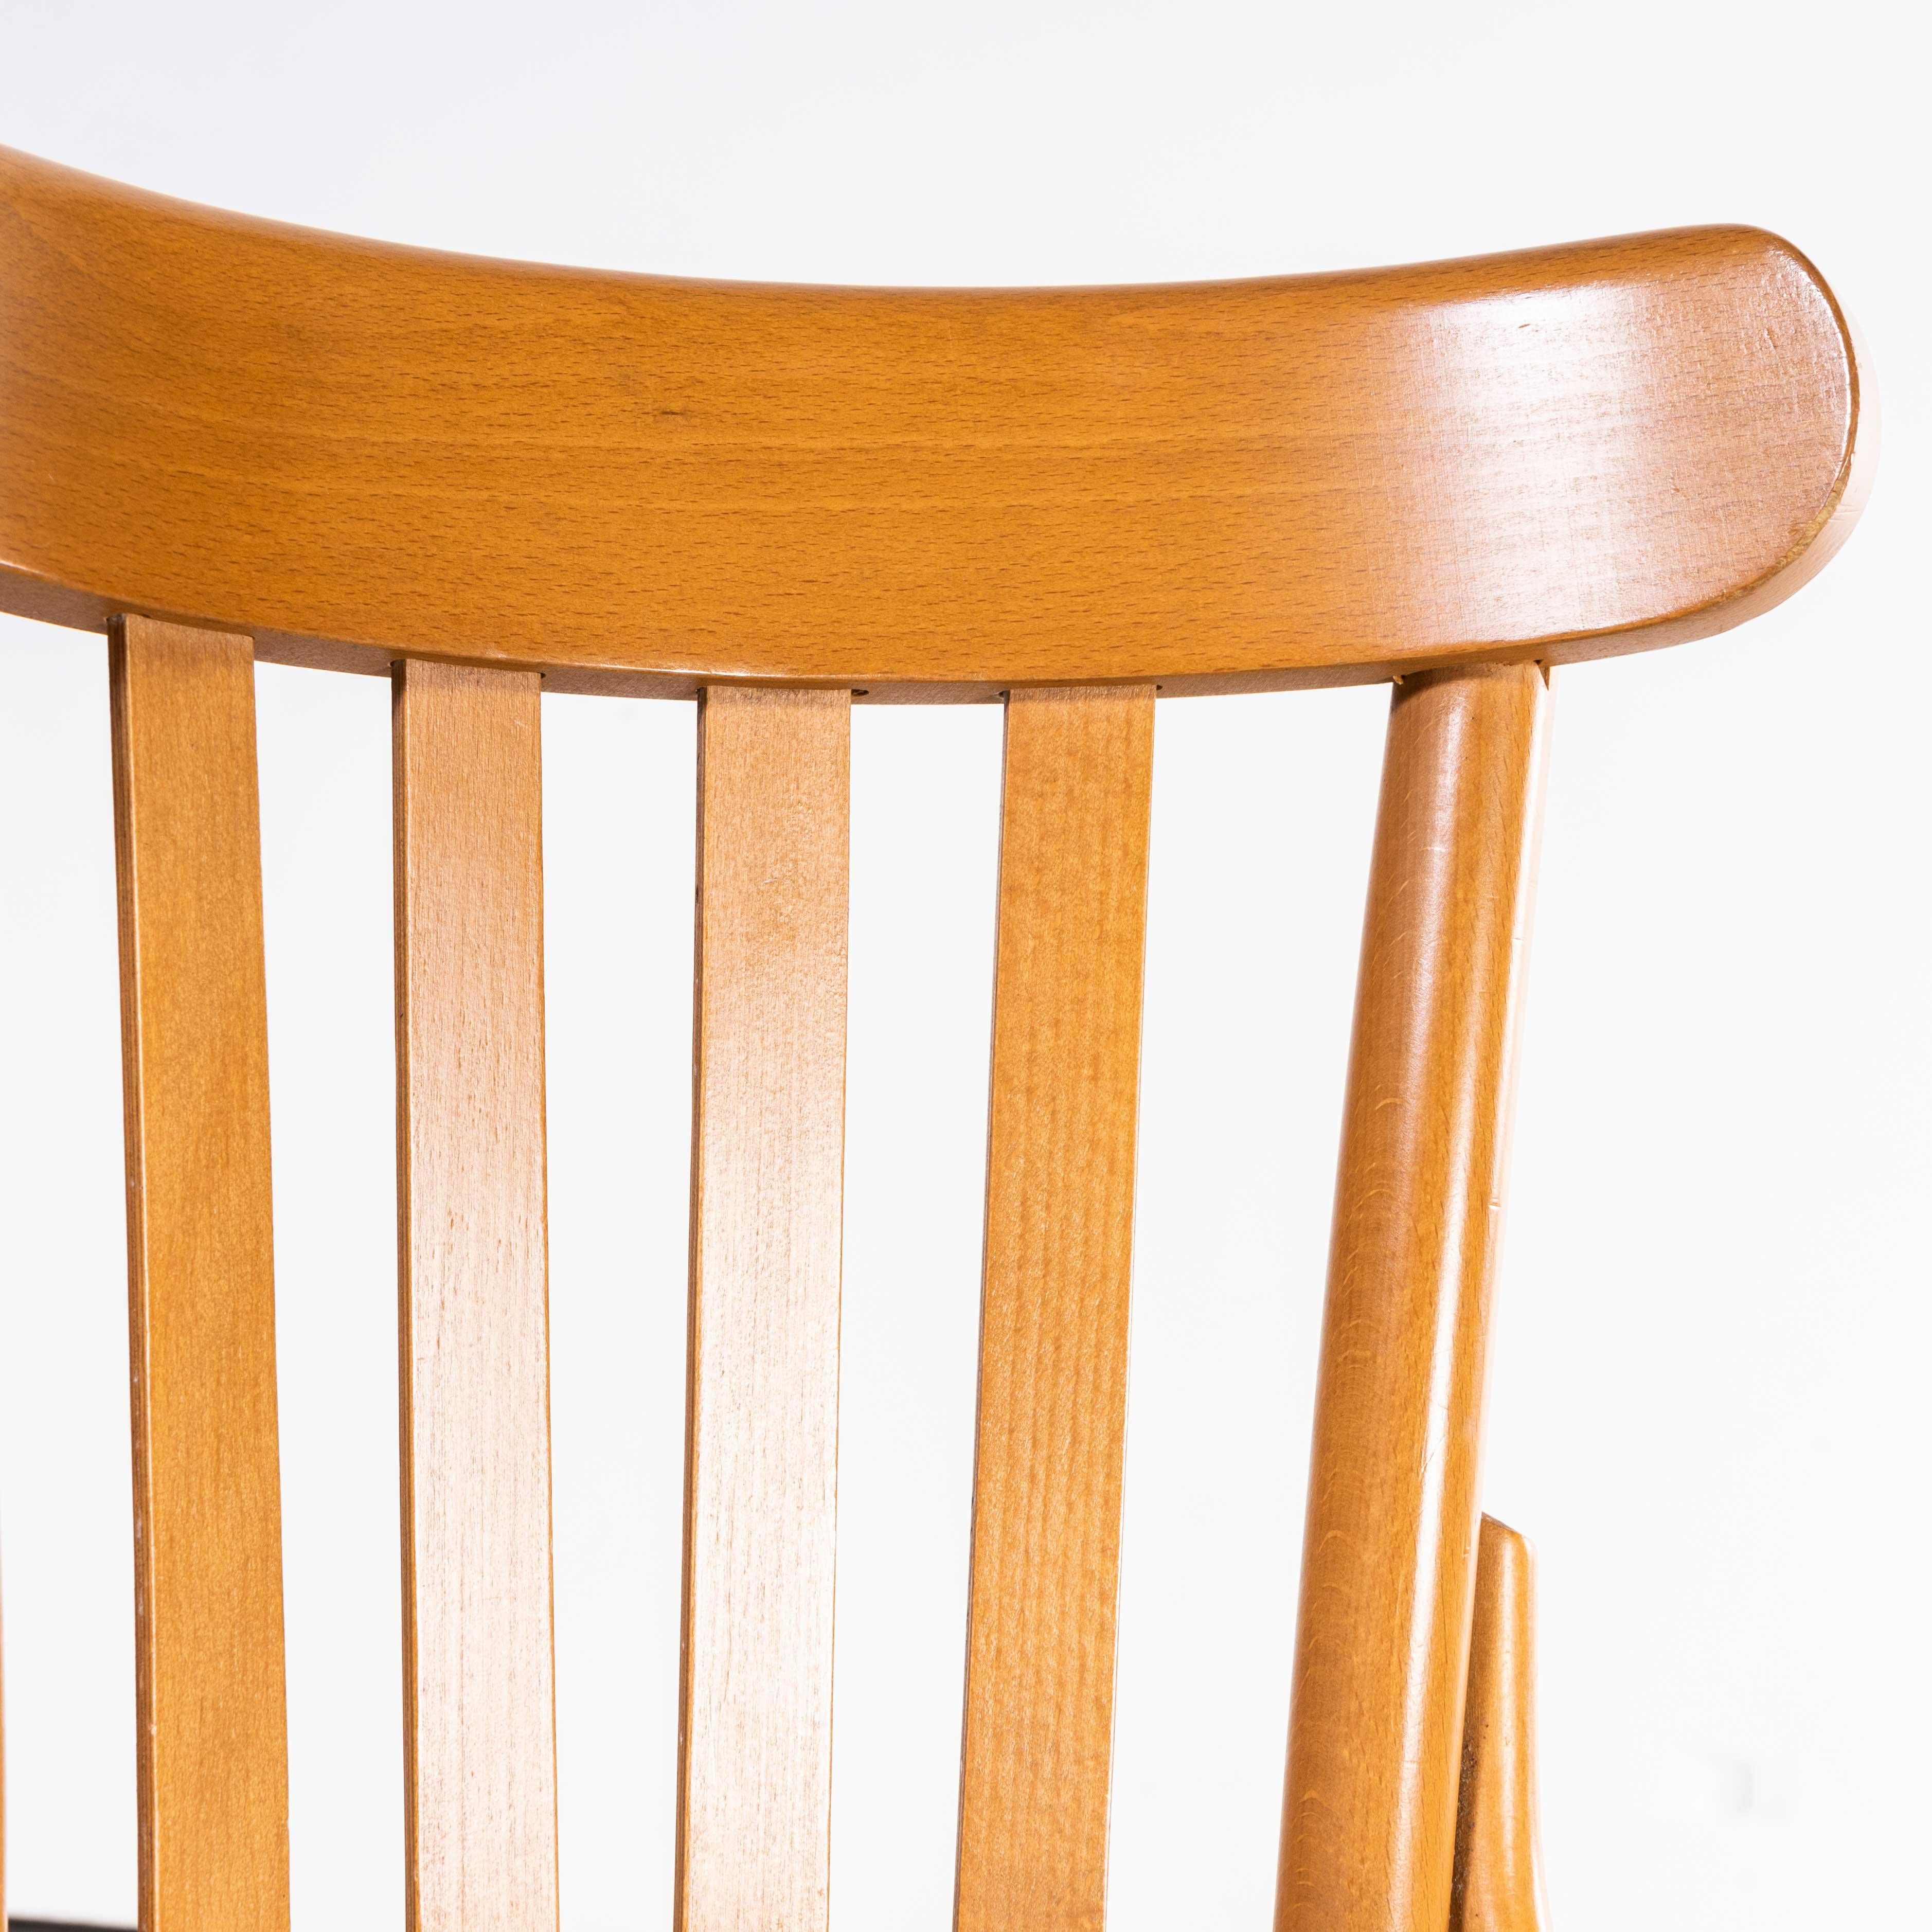 French 1970's Bentwood Honey Beech Striped Seat Bentwood Dining Chairs, Set of Six For Sale